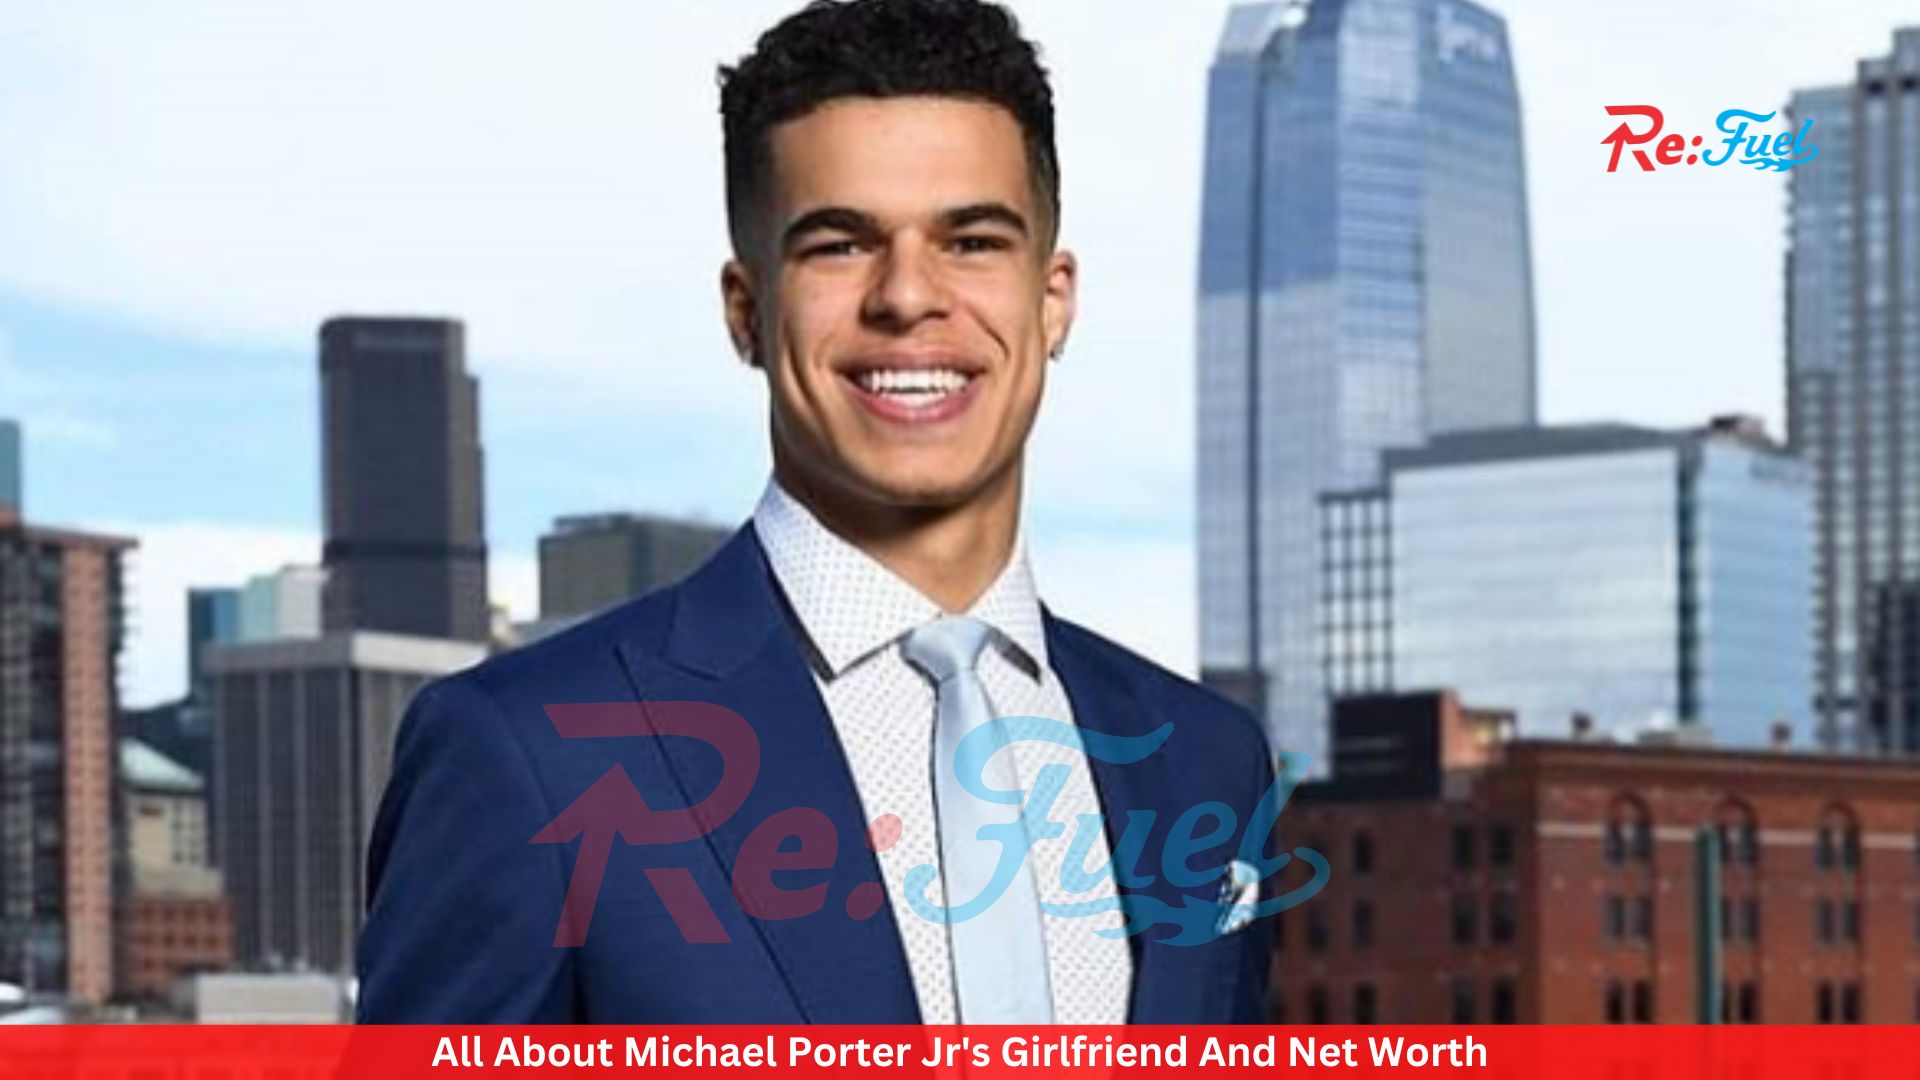 All About Michael Porter Jr's Girlfriend And Net Worth